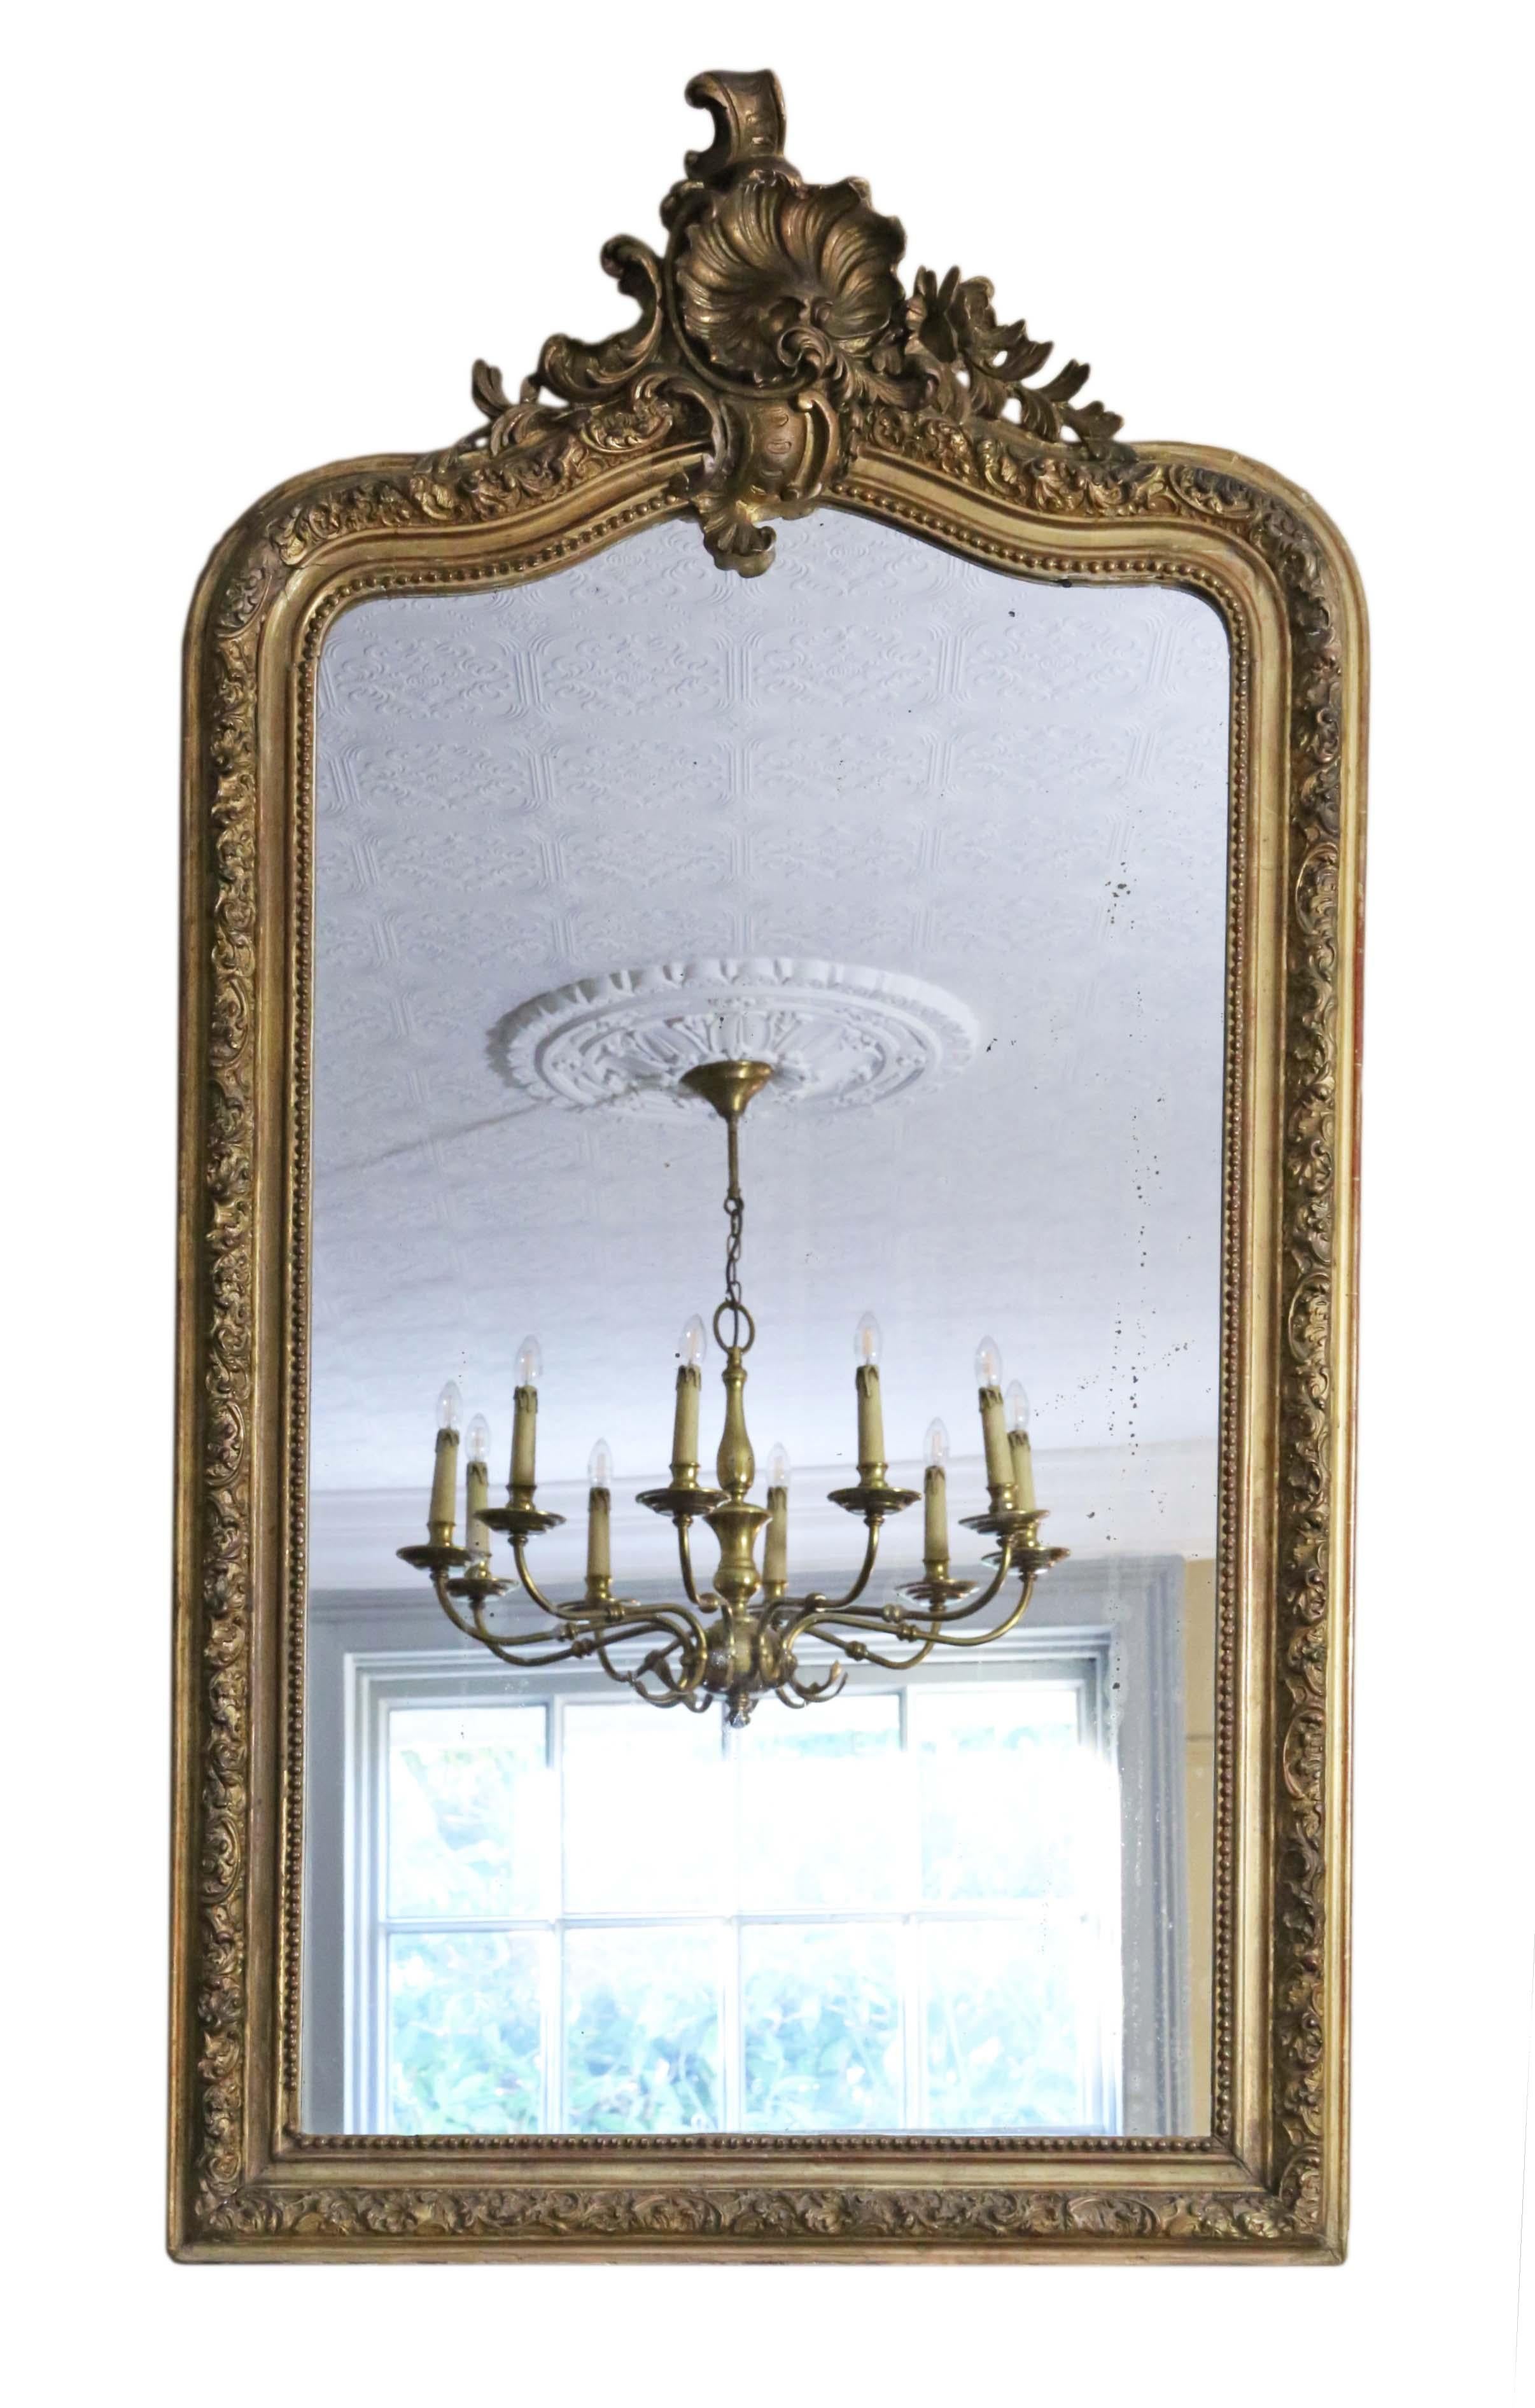 Antique large fine quality gilt wall mirror or overmantle 19th Century.

An impressive rare find, that would look amazing in the right location. No loose joints or woodworm.

The original mirrored glass has light/medium oxidation and age related